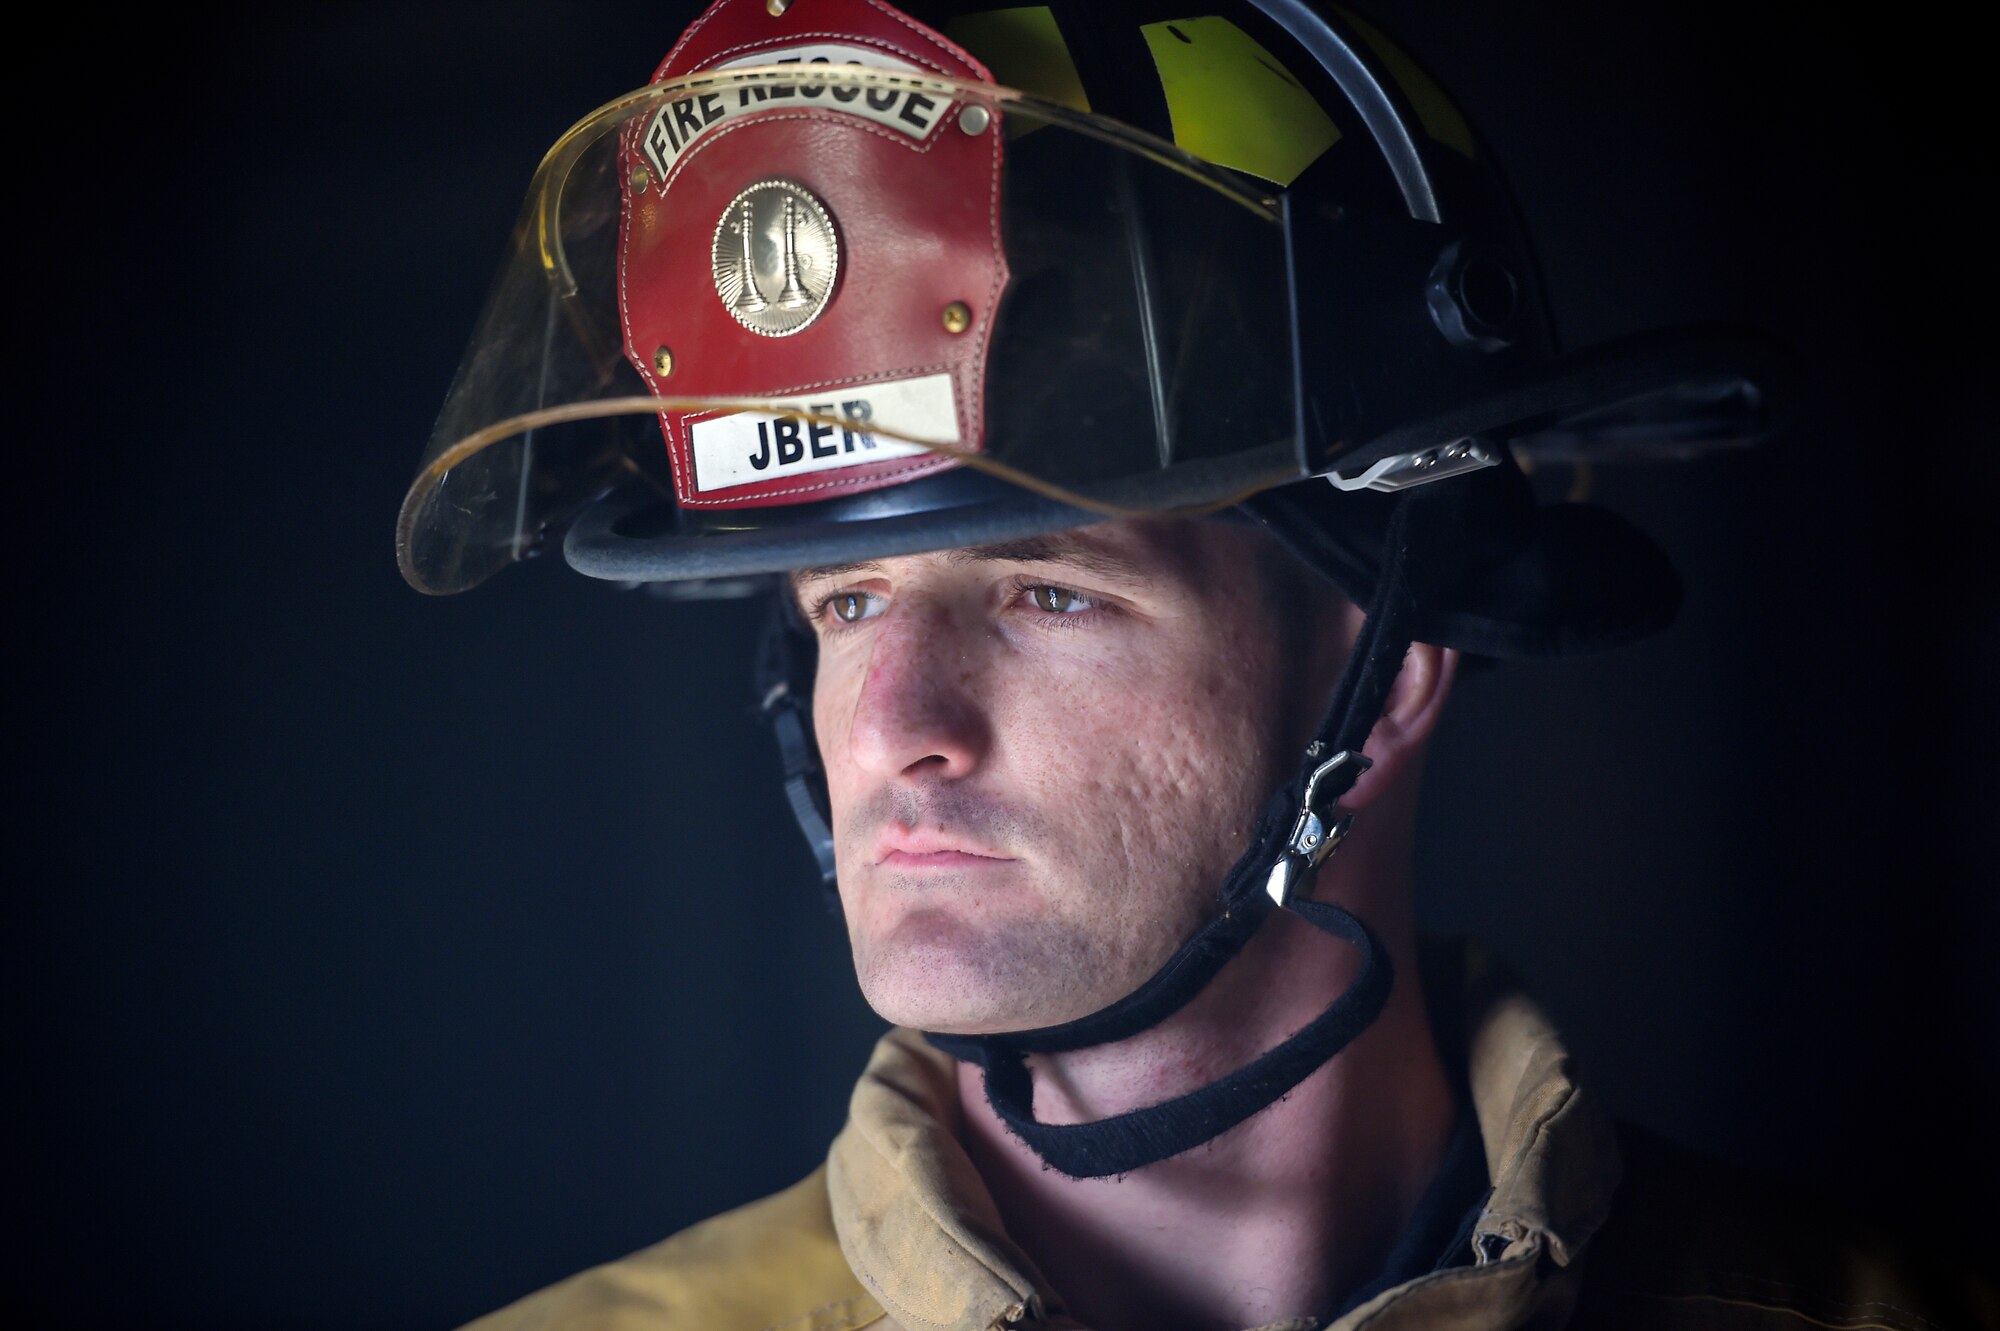 U.S. Air Force Staff Sgt. Matthew Wilson, a fire protection specialist assigned to the 673rd Civil Engineer Squadron, supervises firefighting drills at the live-fire simulator at Joint Base Elmendorf-Richardson, Alaska, April 13, 2016. The JBER fire department is trained to respond to various emergencies and regularly conducts sustainment exercises to maintain proficiency and operational readiness.